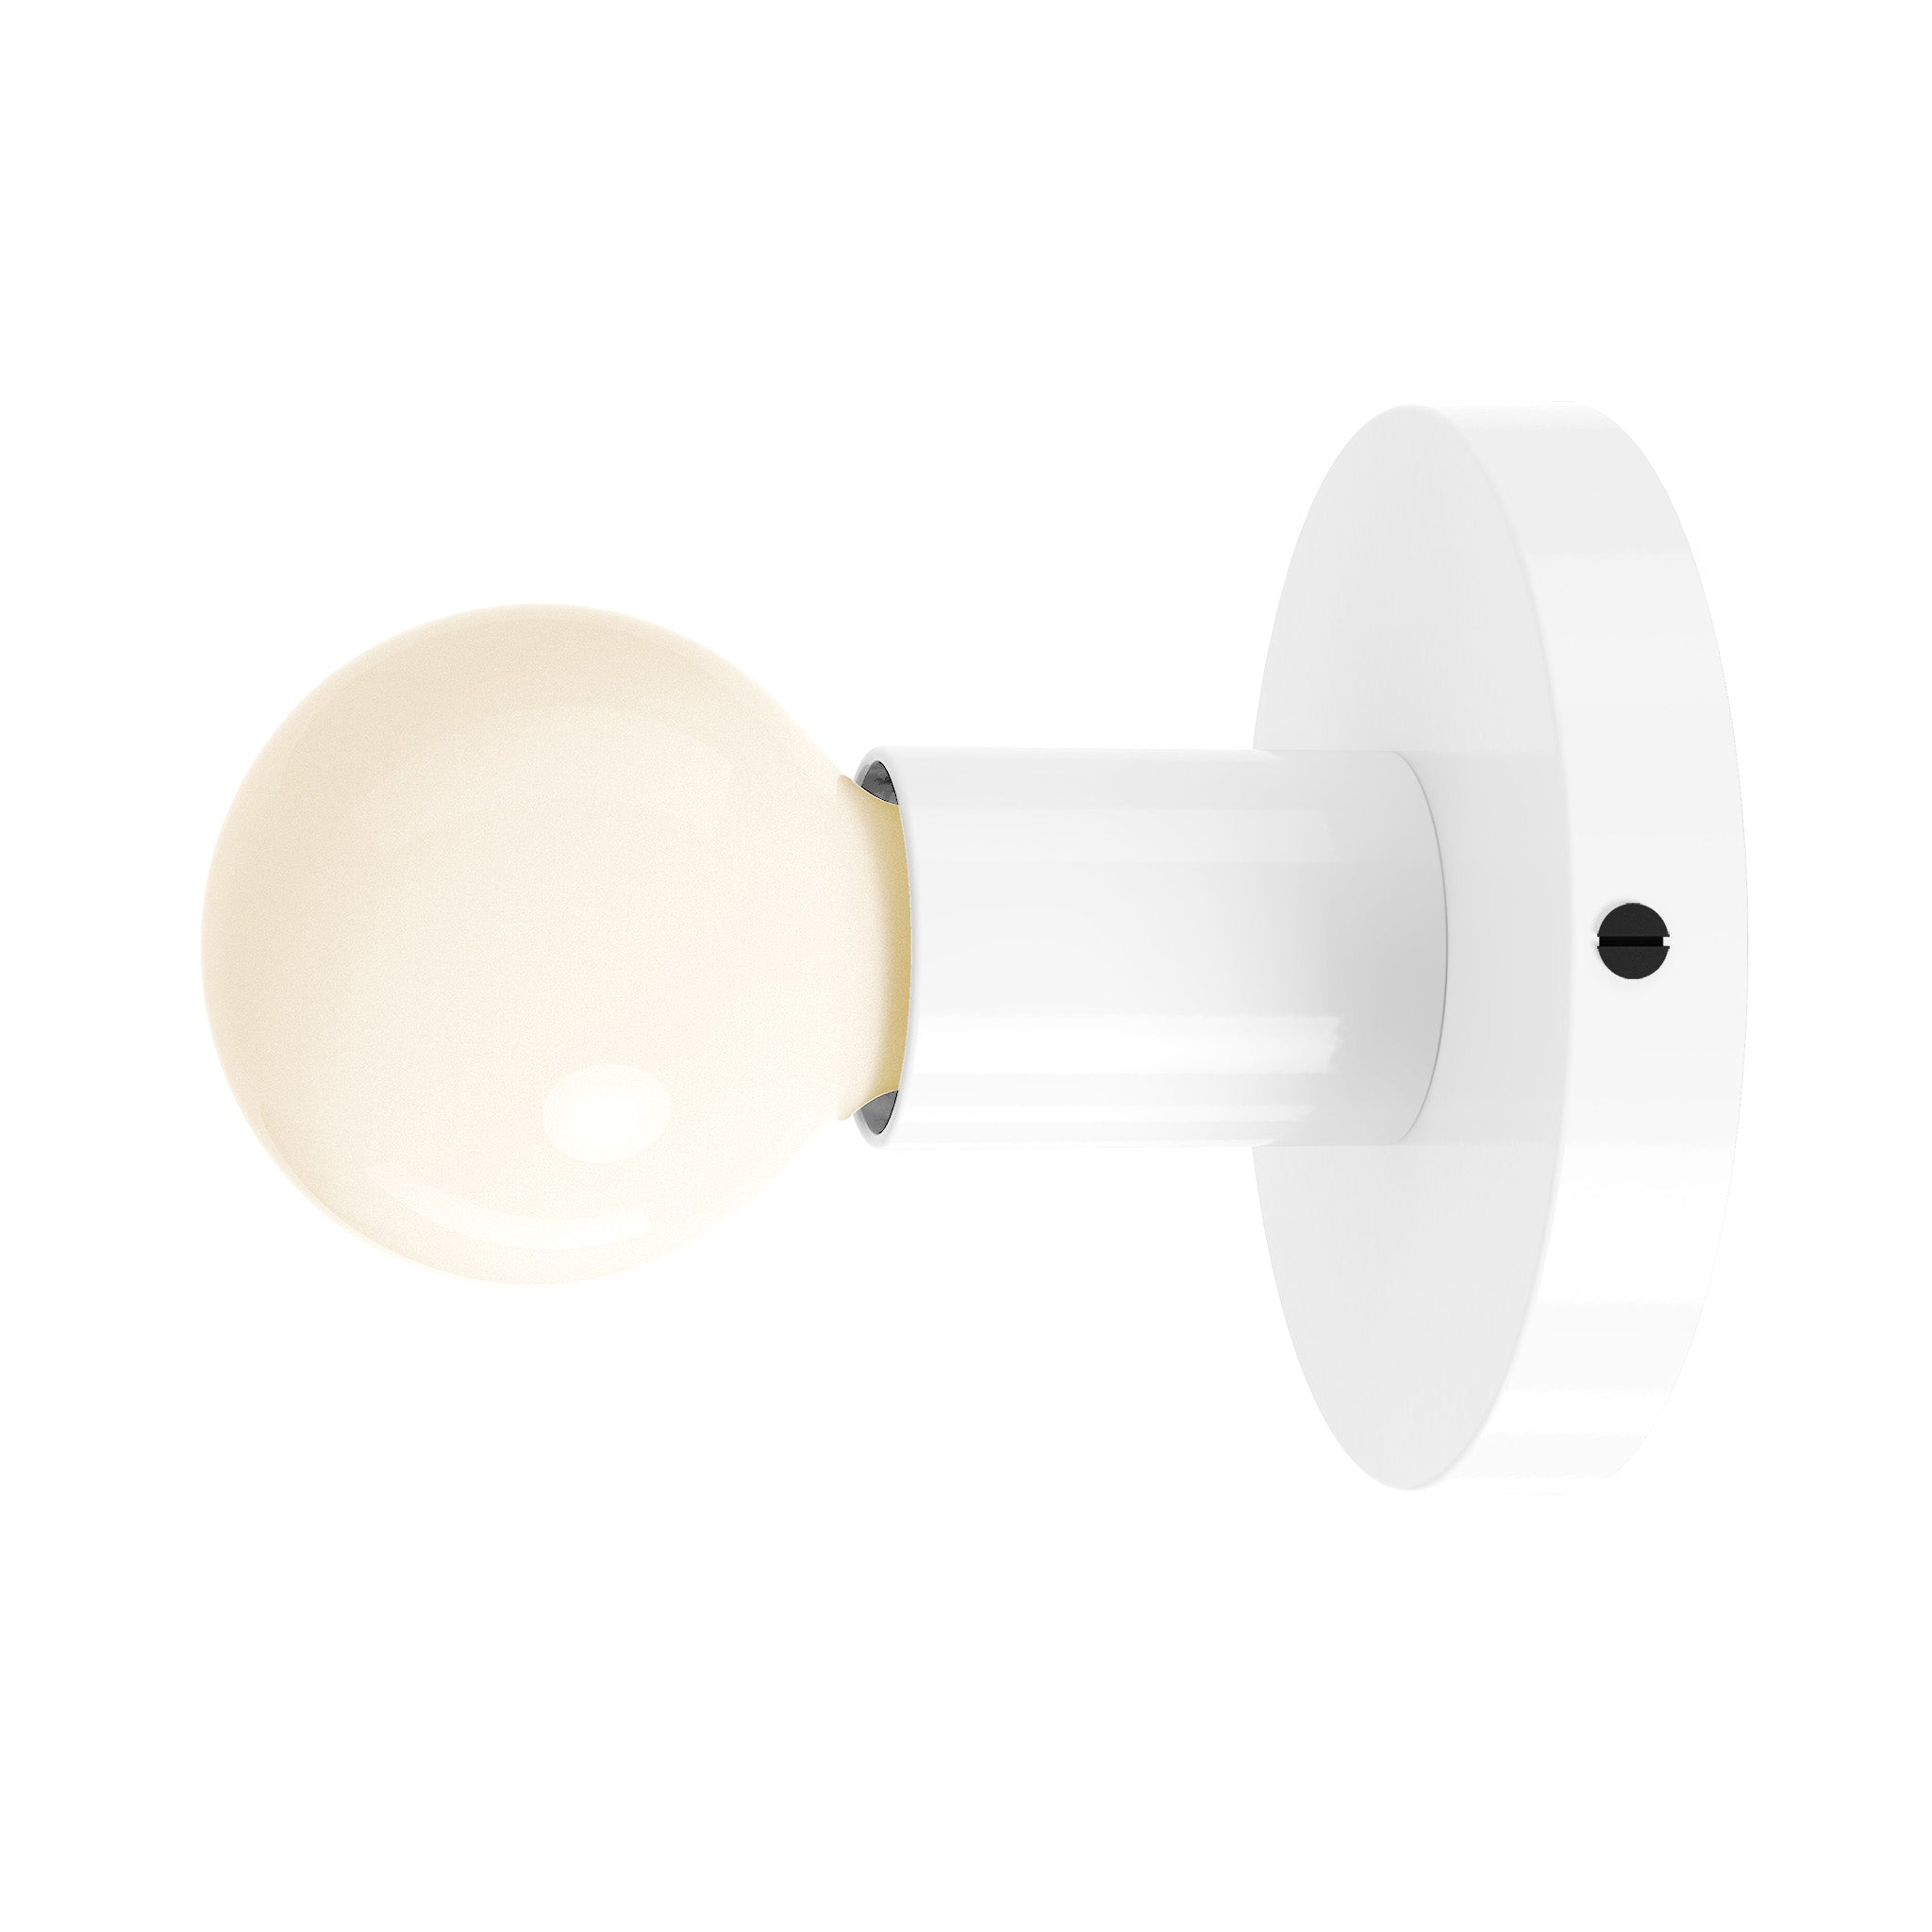 black white color twink sconce dutton brown lighting